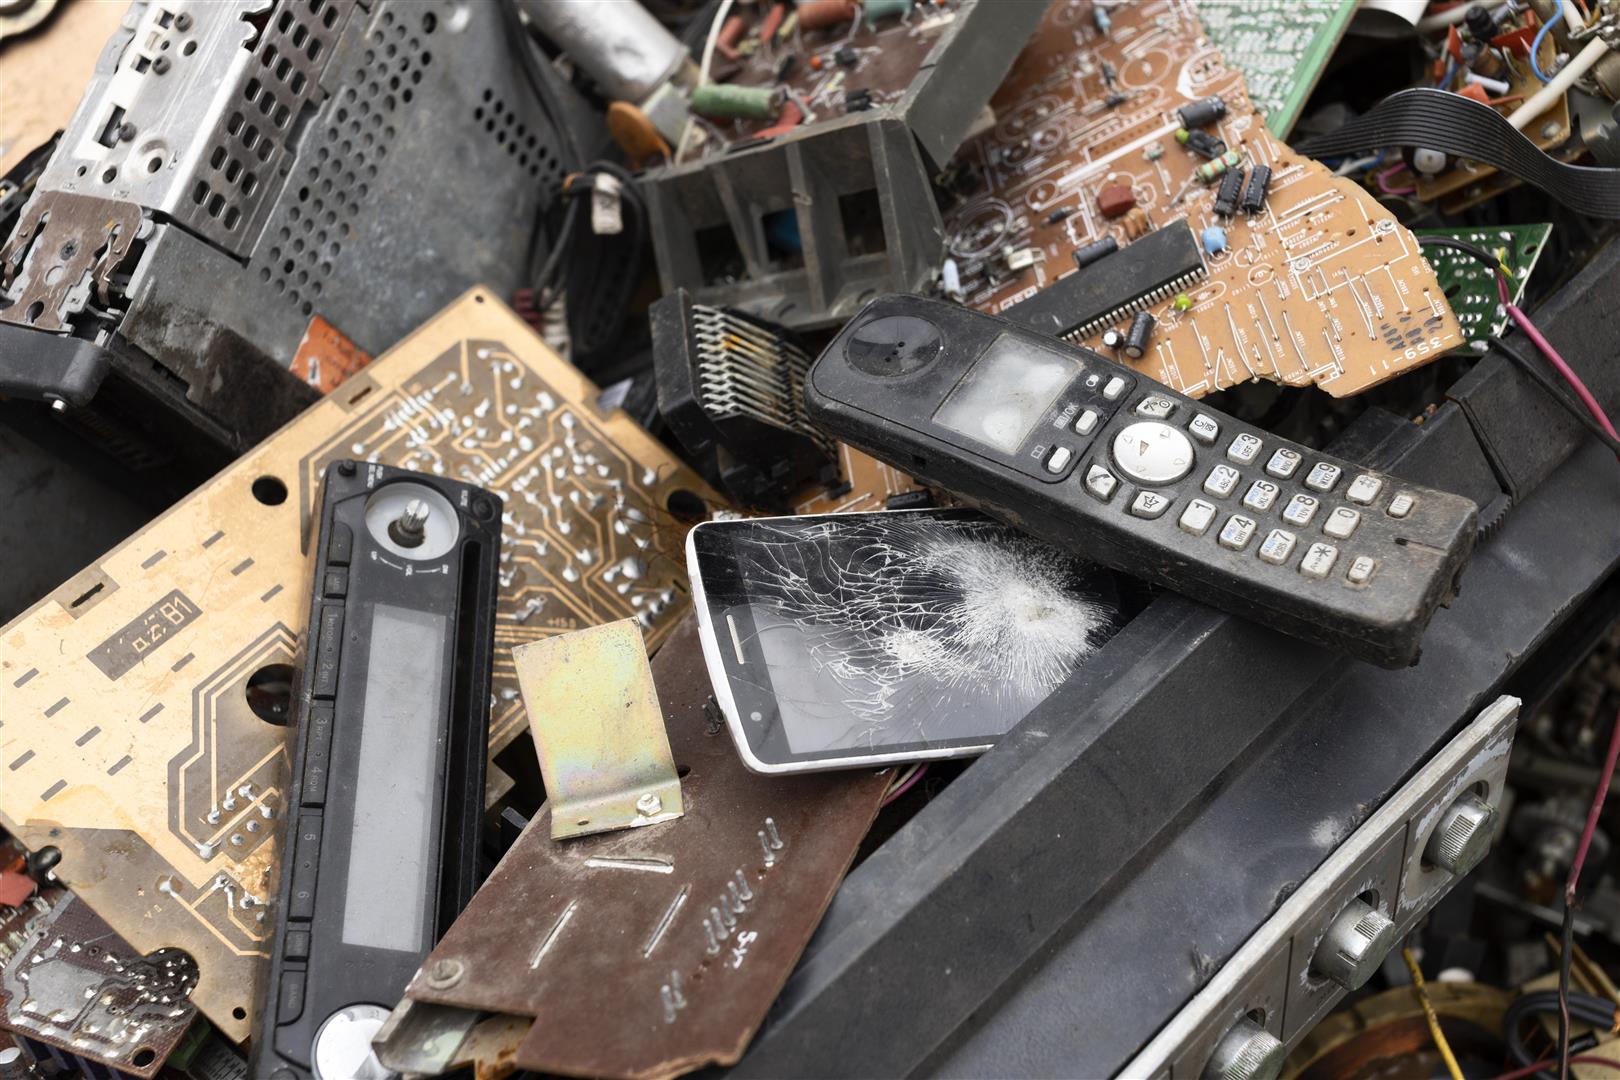 E-waste and remedial measures manufacturers should be aware of to prevent violation of law